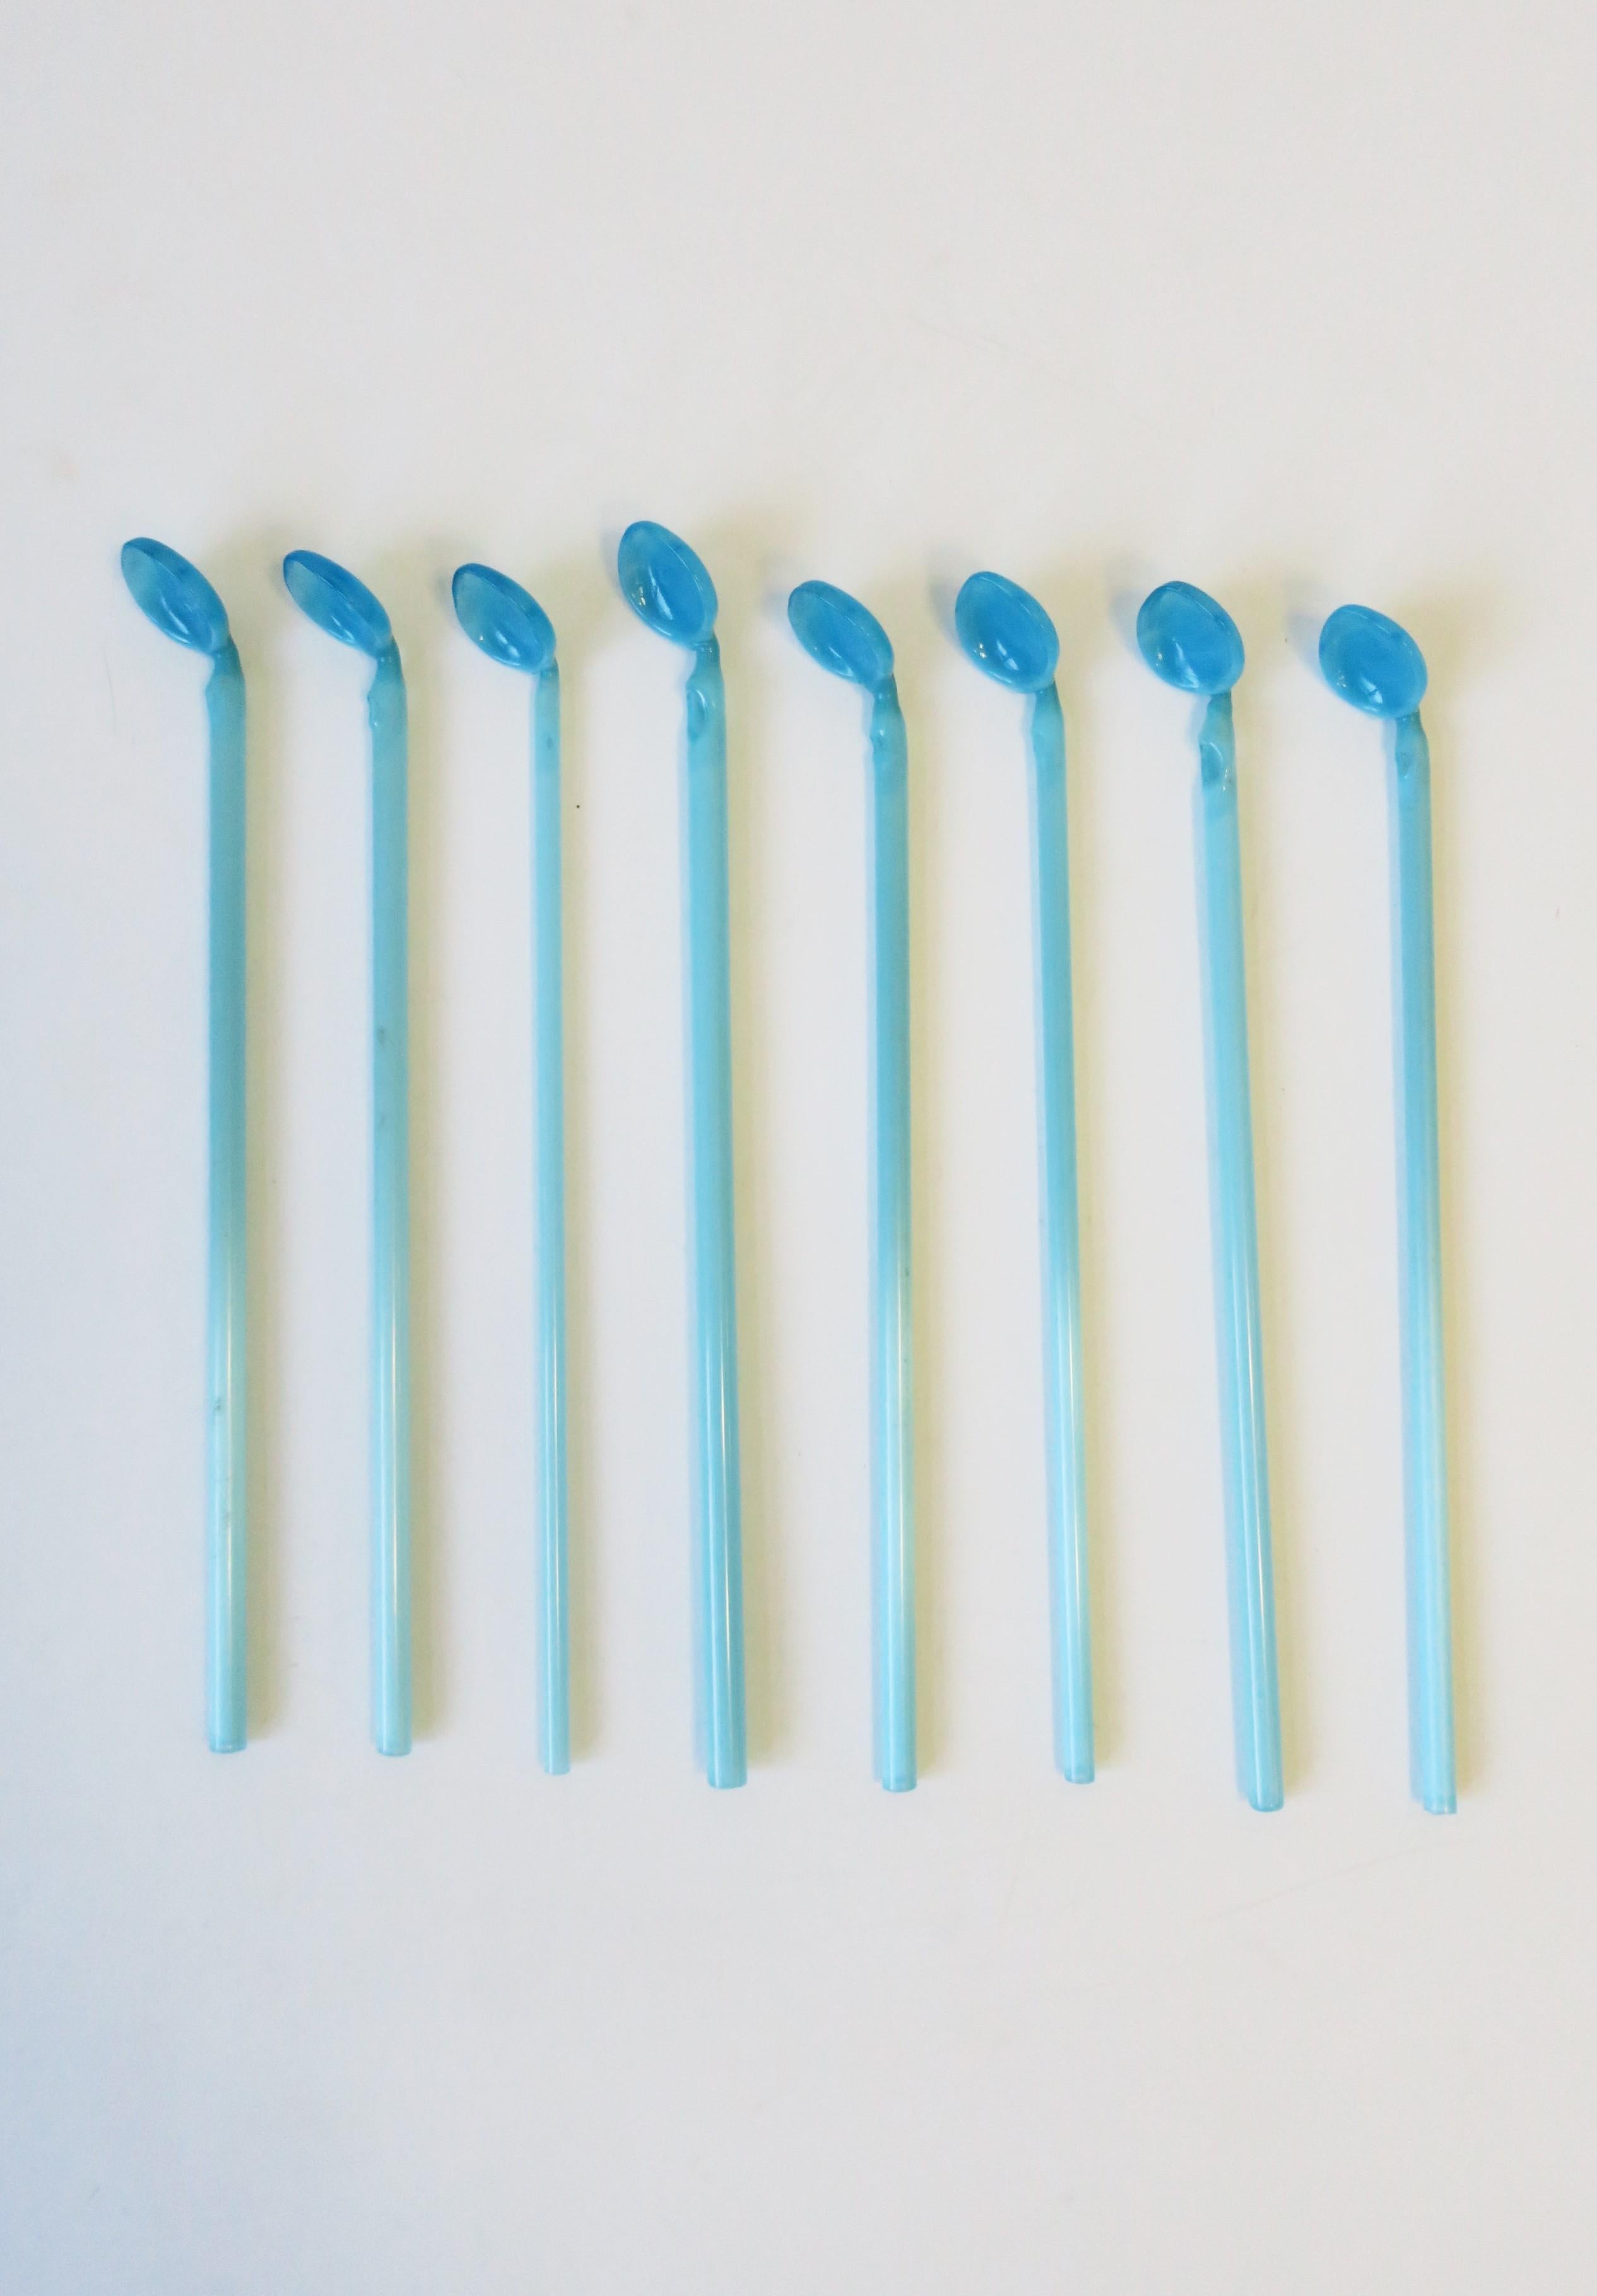 Eight (8) very beautiful vintage azure/sky blue art glass straw with spoon set, circa mid-20th century, Italy. Great for entertaining; bar, yacht, etc. Each measure: 8